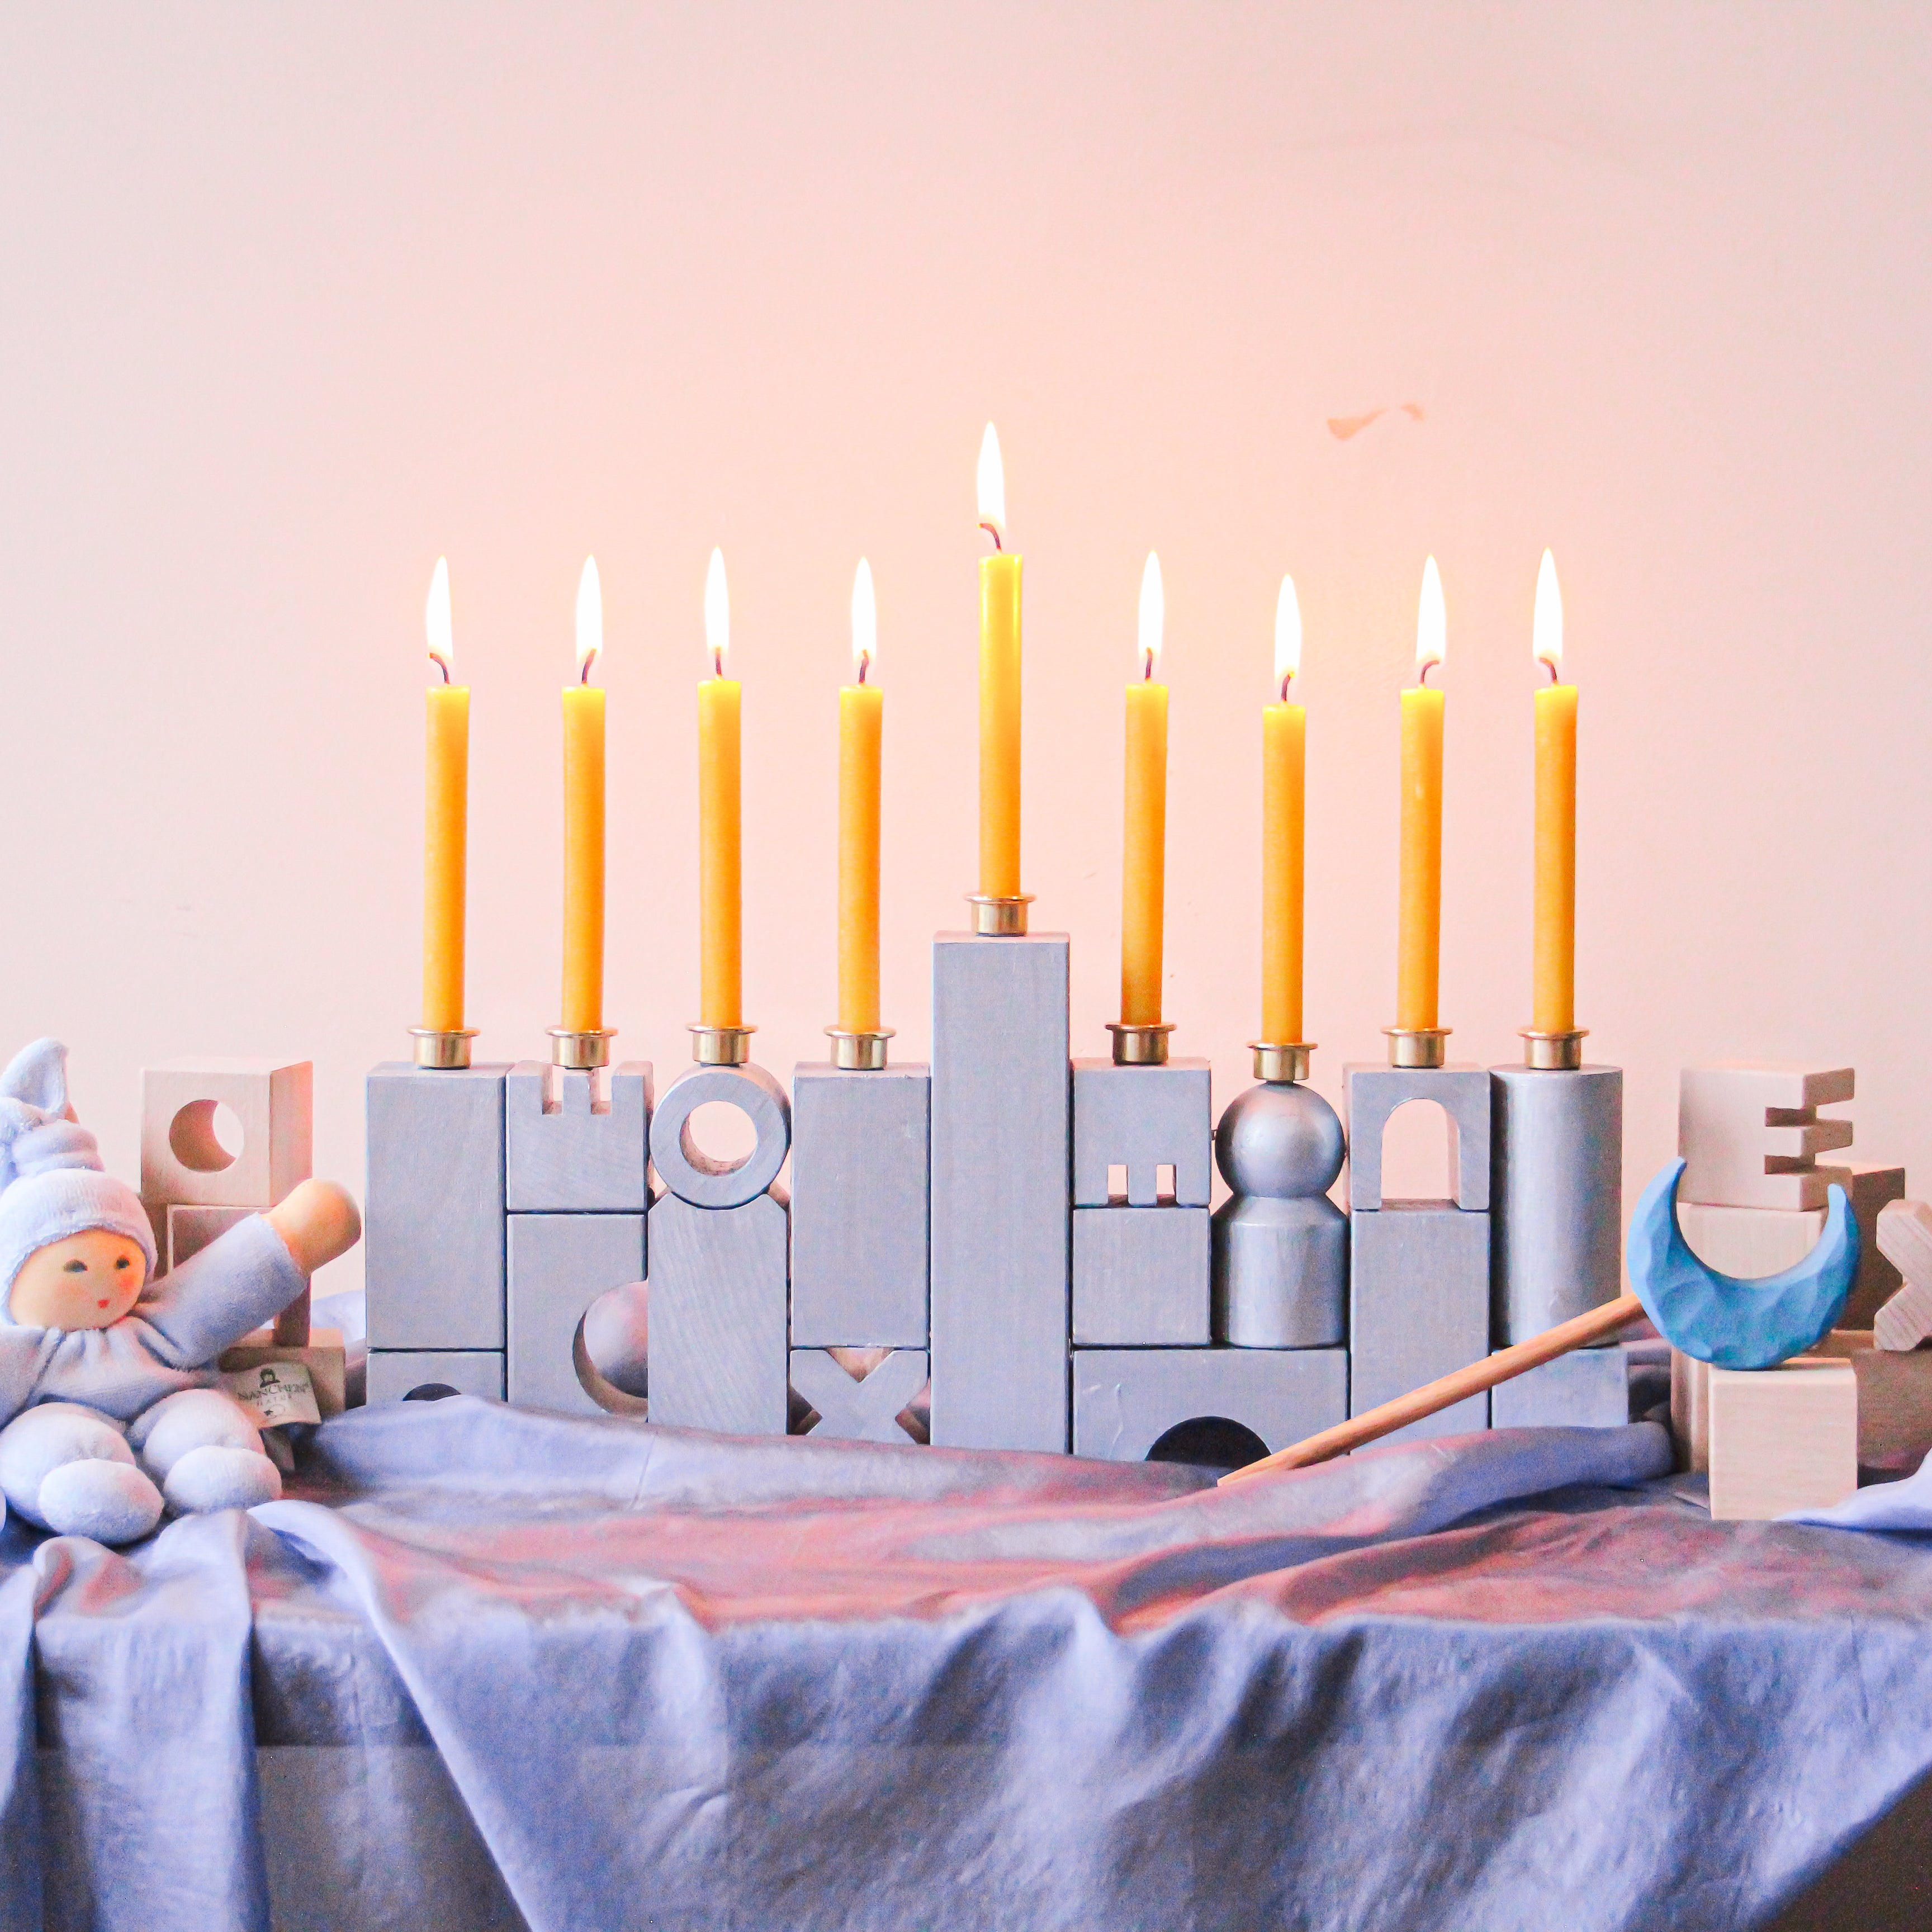 A HABA Block Menorah sits on a playsilk with lit candles.